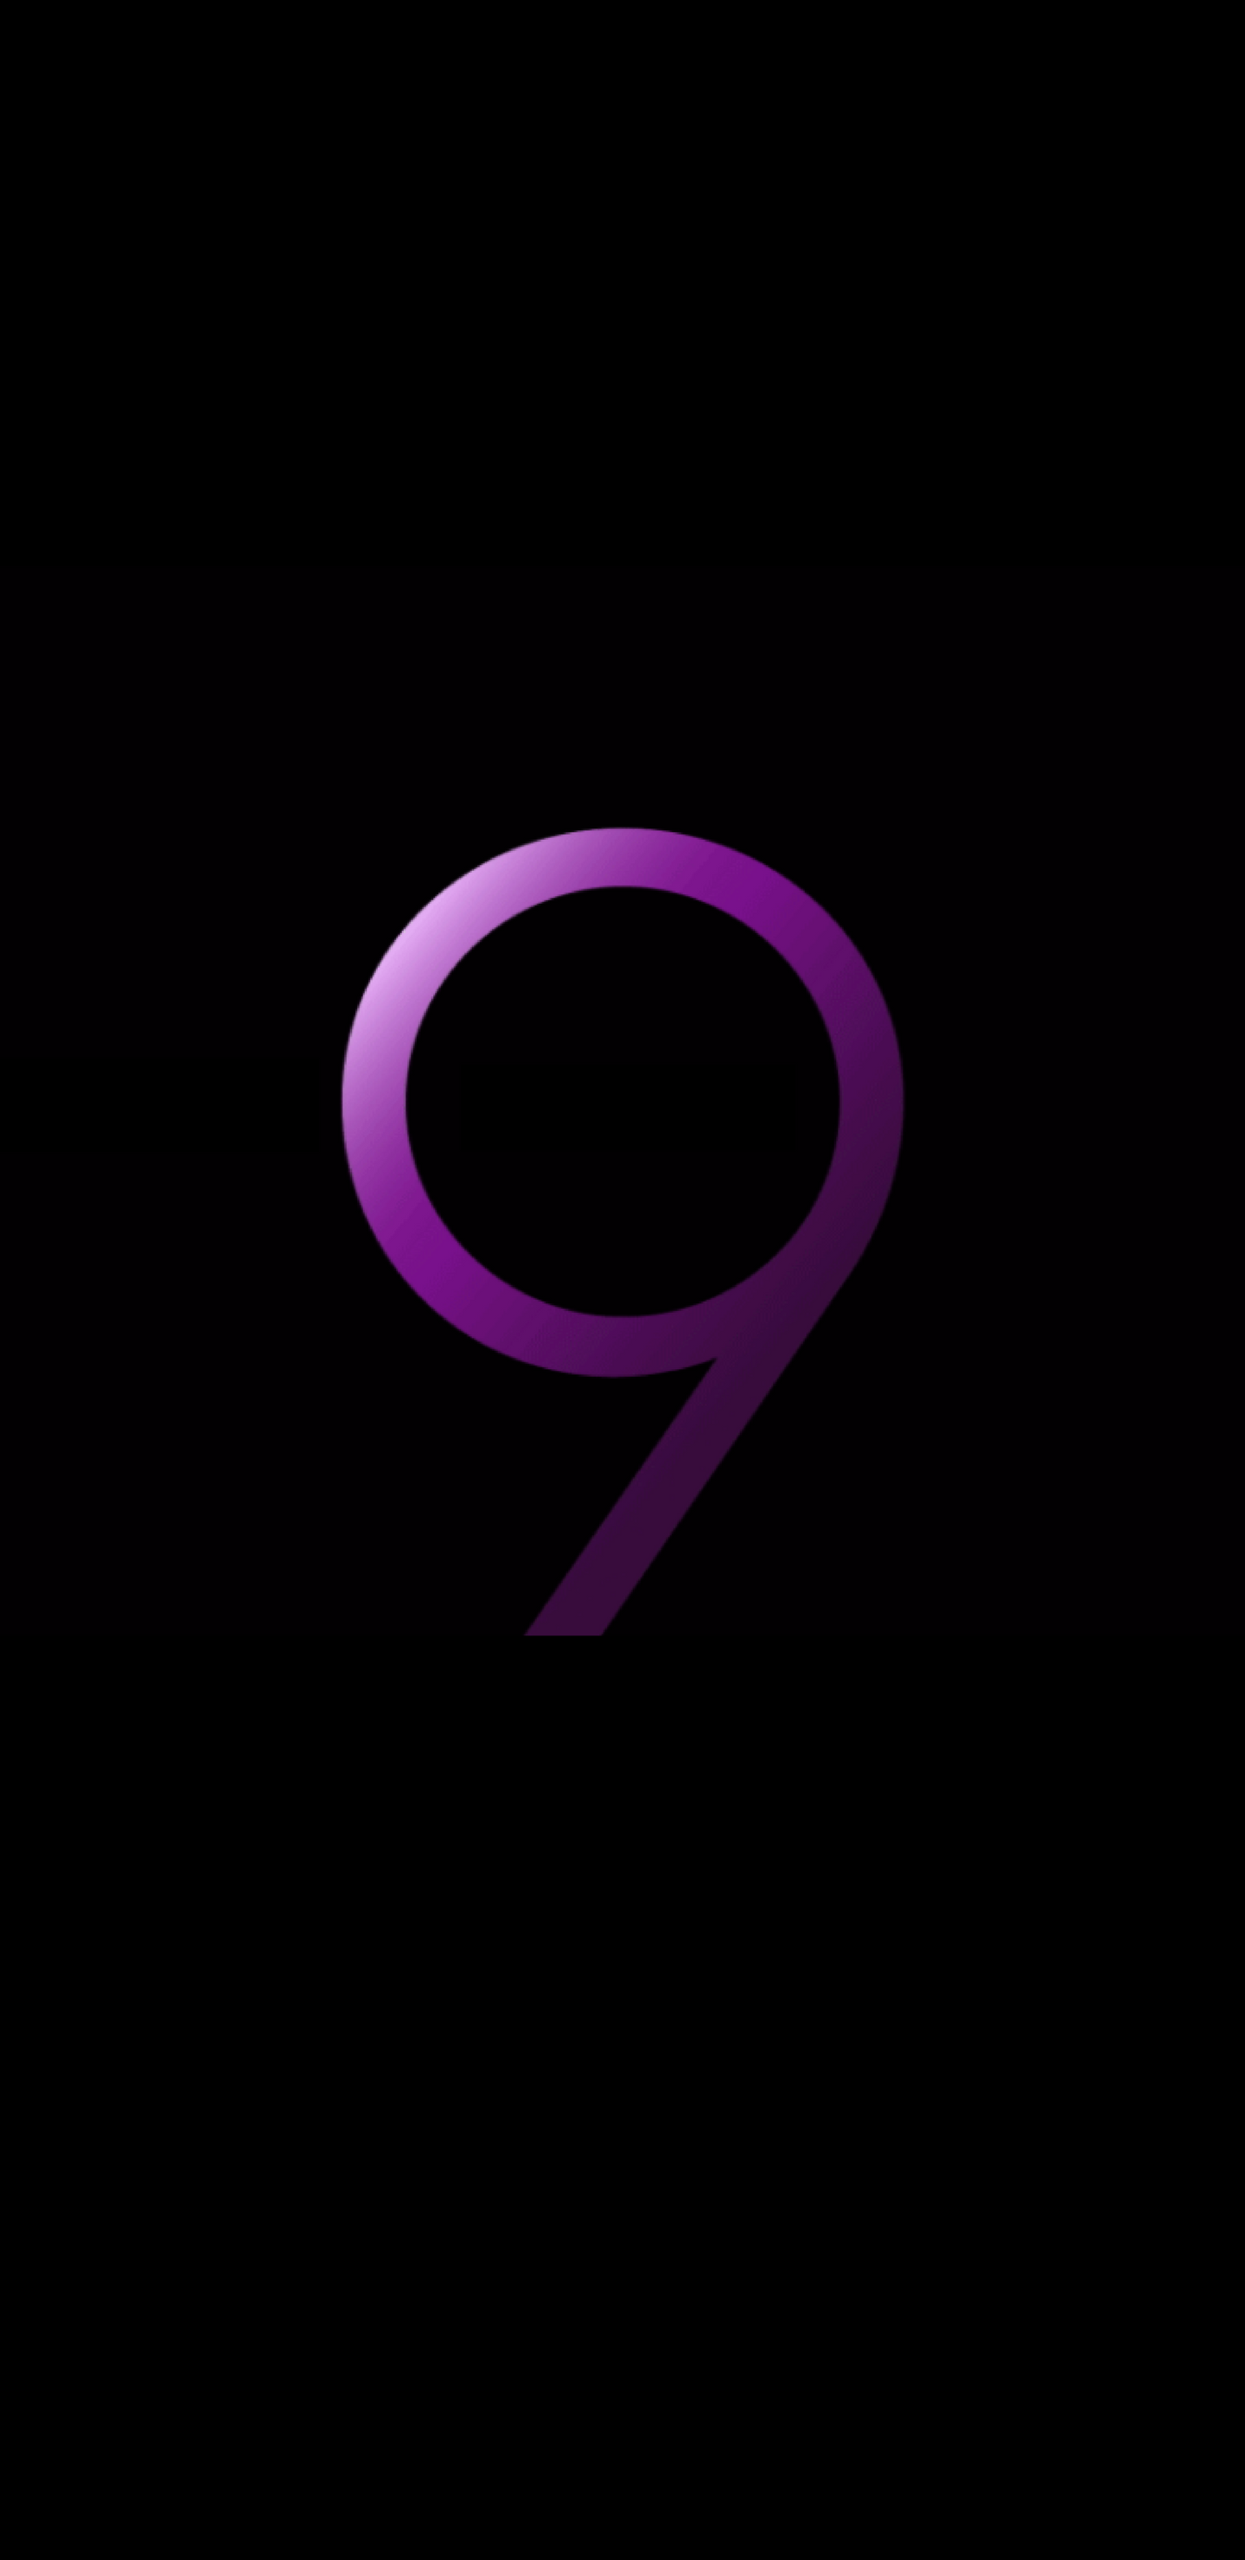 Galaxy S9/S9+ (QHD) - Android Themes